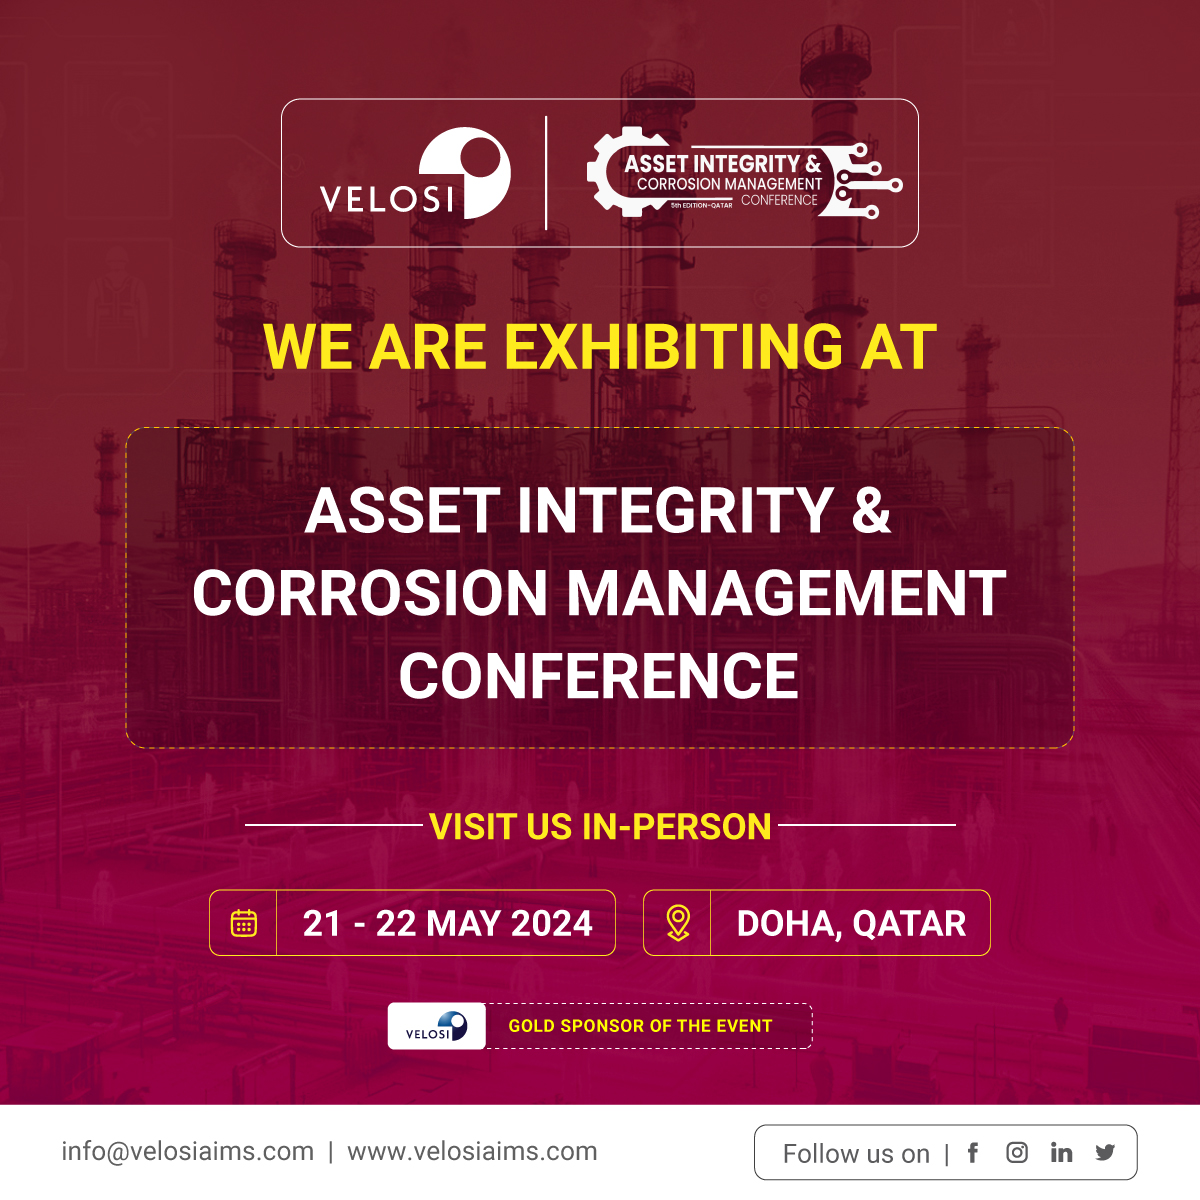 Asset Integrity & Corrosion Management Conference